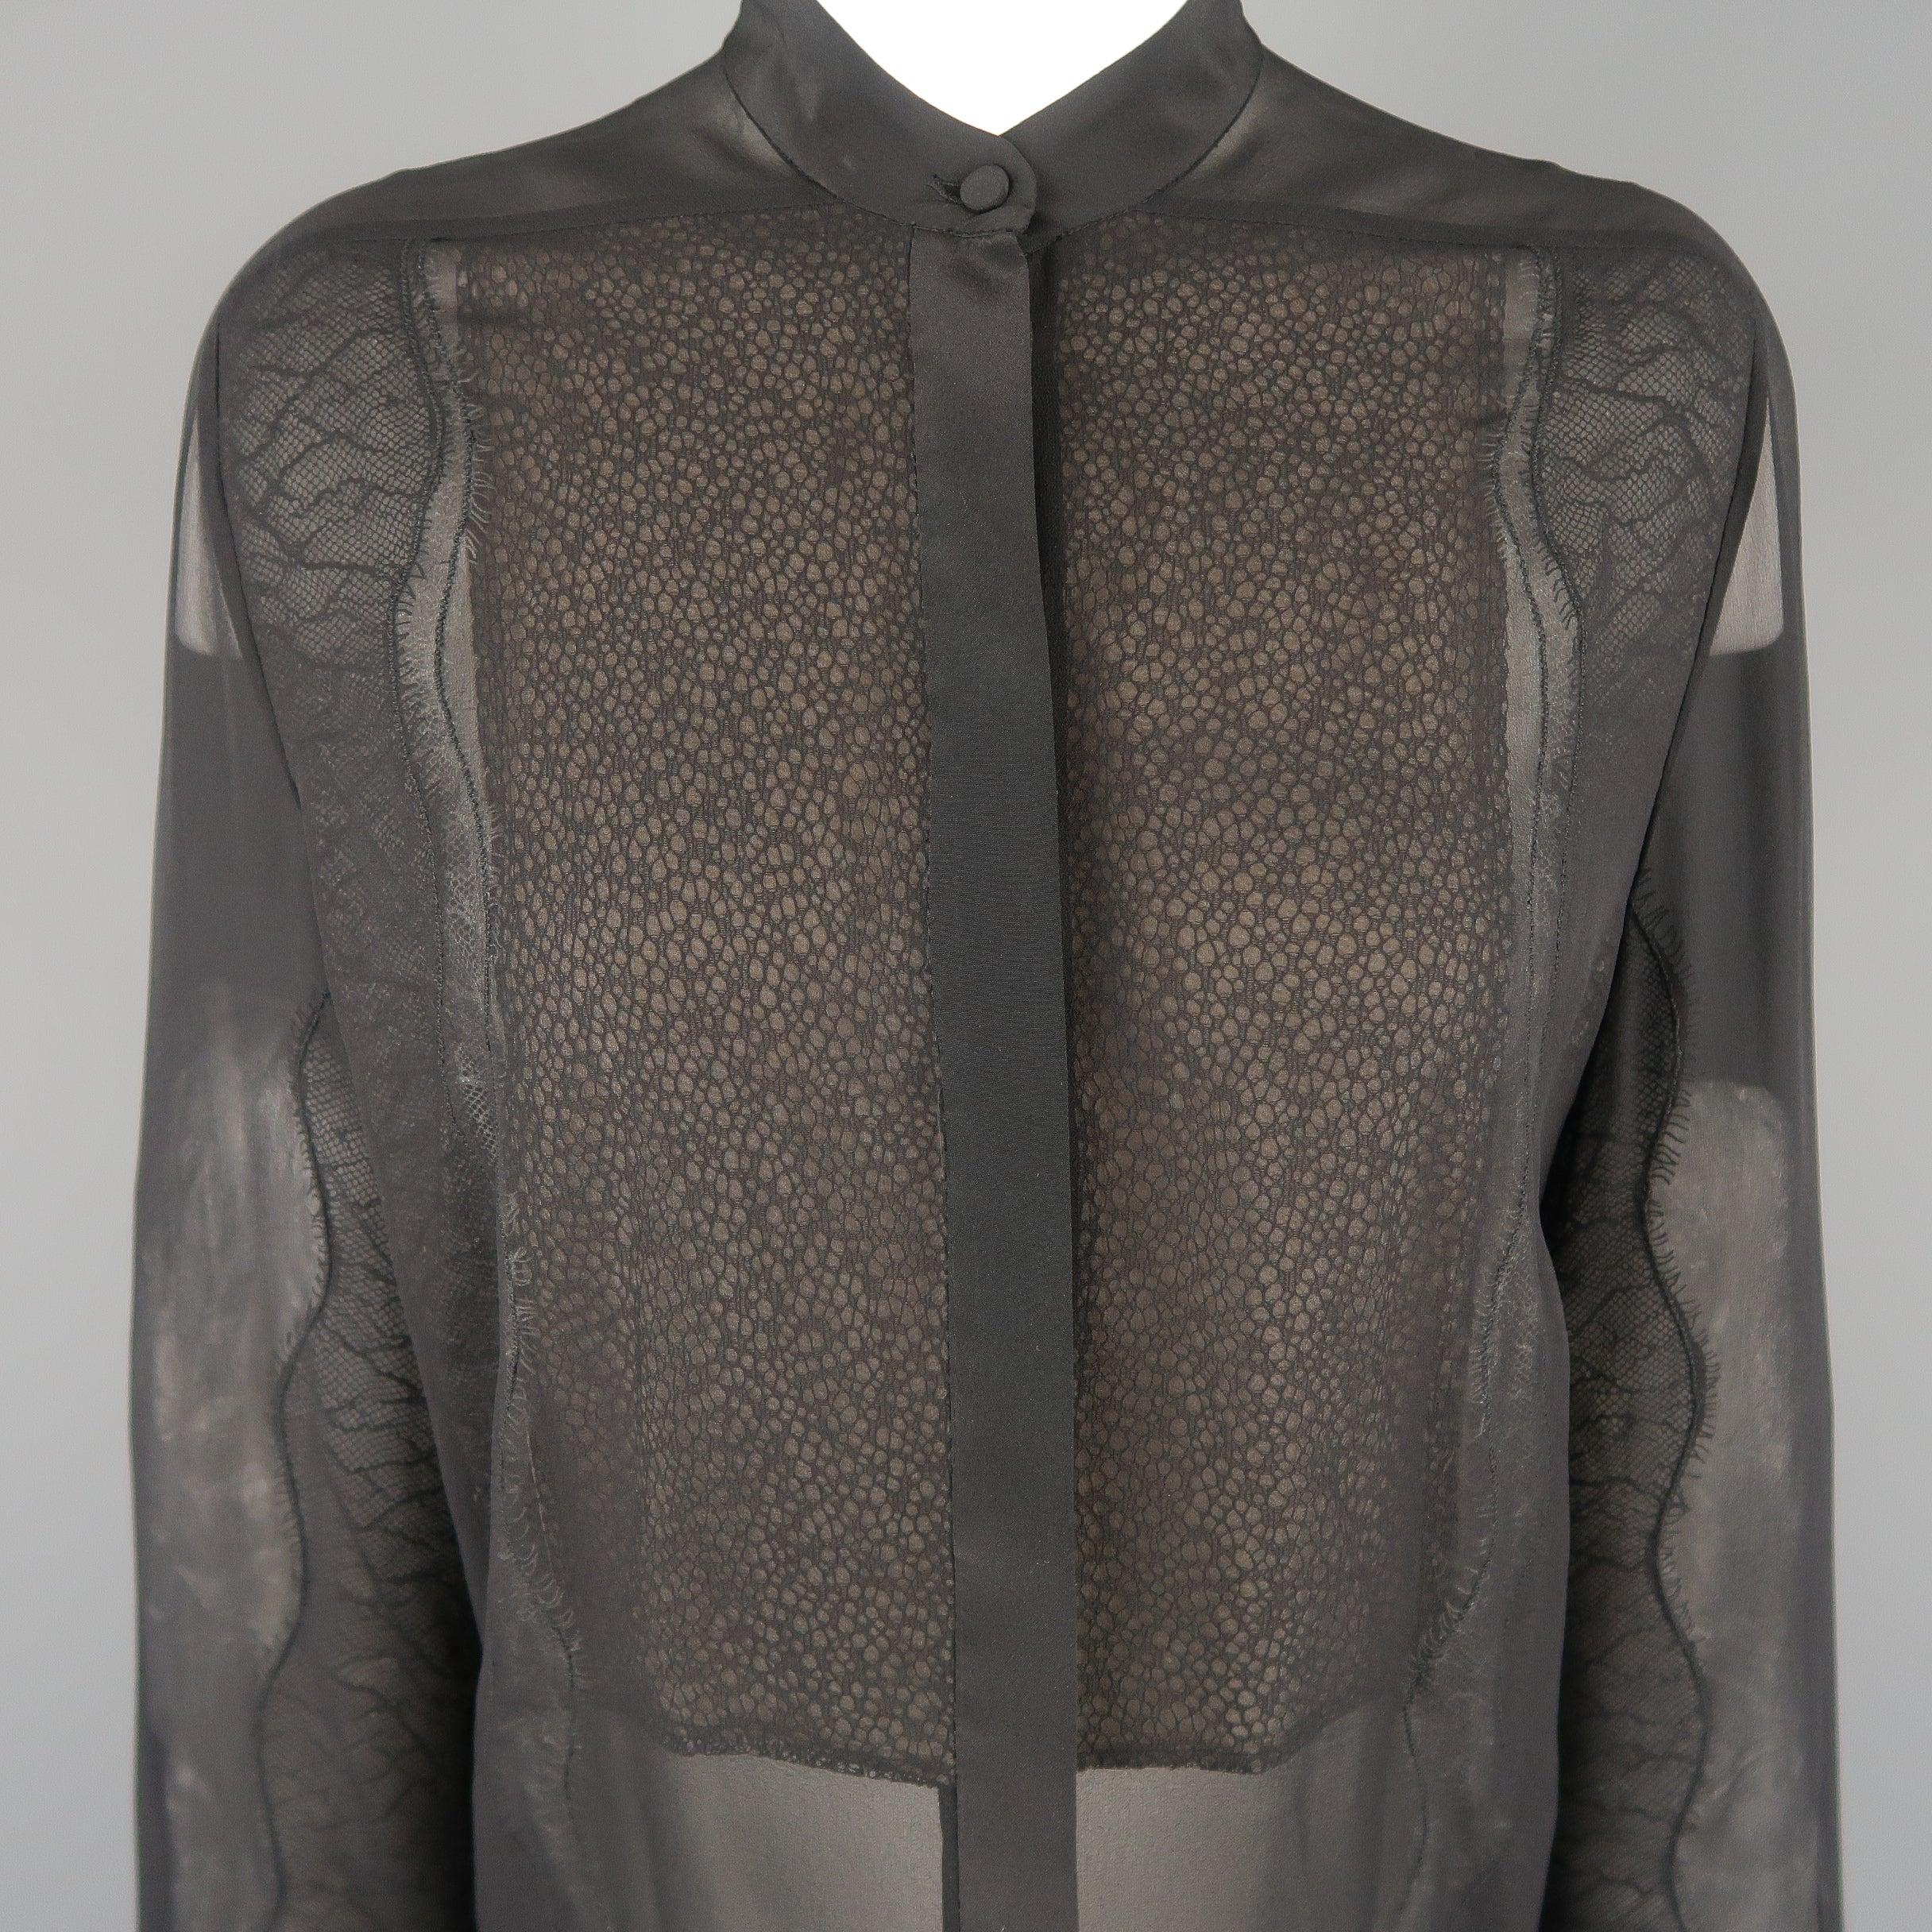 3.1 PILLIP LIM blouse come sin black silk chiffon with a band collar, hidden placket button front, and lace panels. 
Excellent Pre-Owned Condition.
 

Marked:   (no size)
 

Measurements: 
  
l	Shoulder: 14 inches 
l	Bust: 20 inches 
l	Sleeve: 25